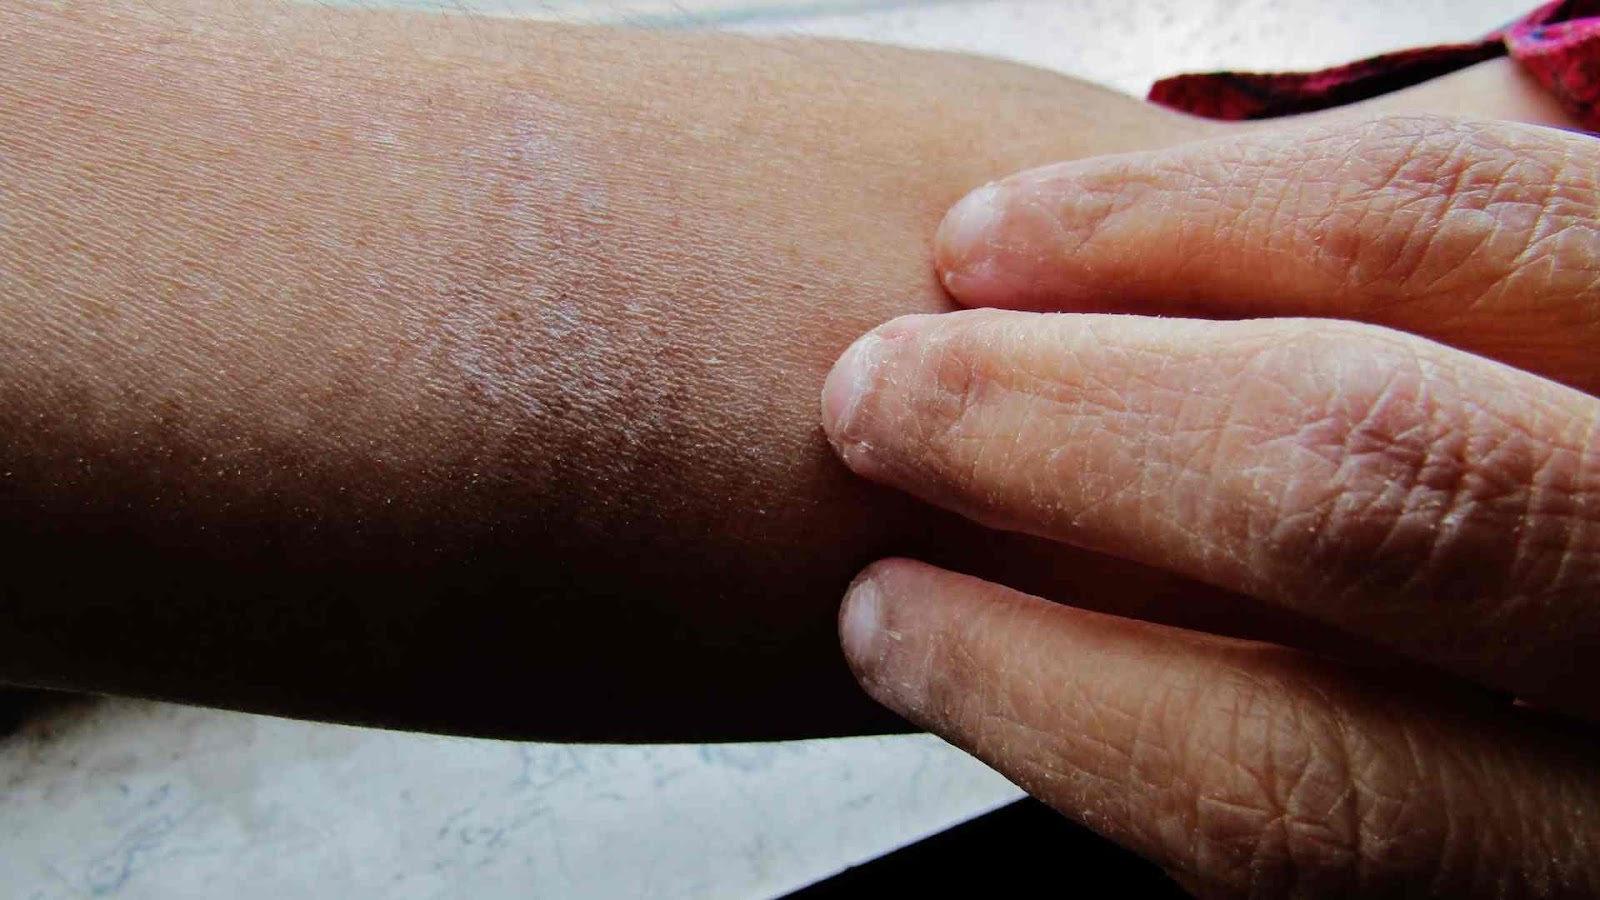 Thin skin is a side effect of prolonged topical steroid use.